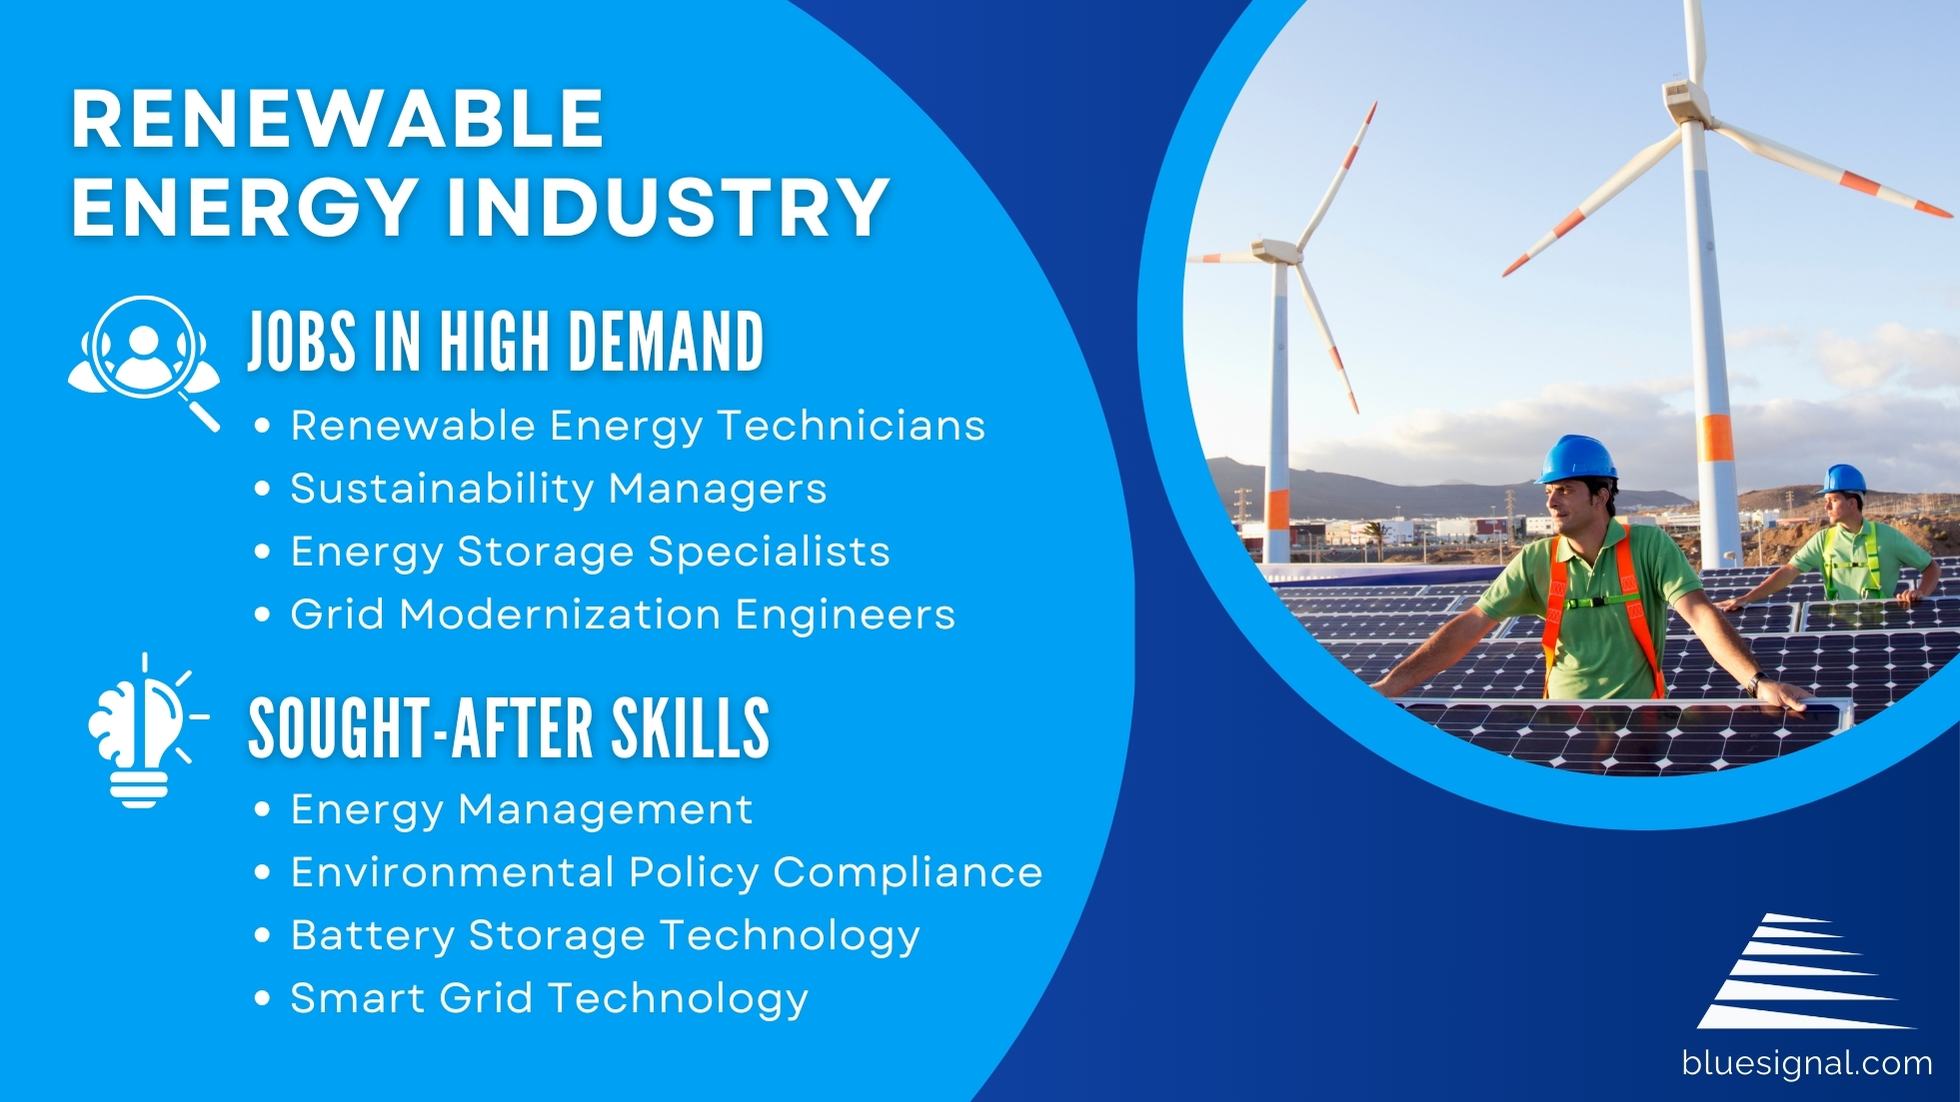 Solar panels and wind turbines representing the Renewable Energy Industry with a list of high-demand jobs and skills.